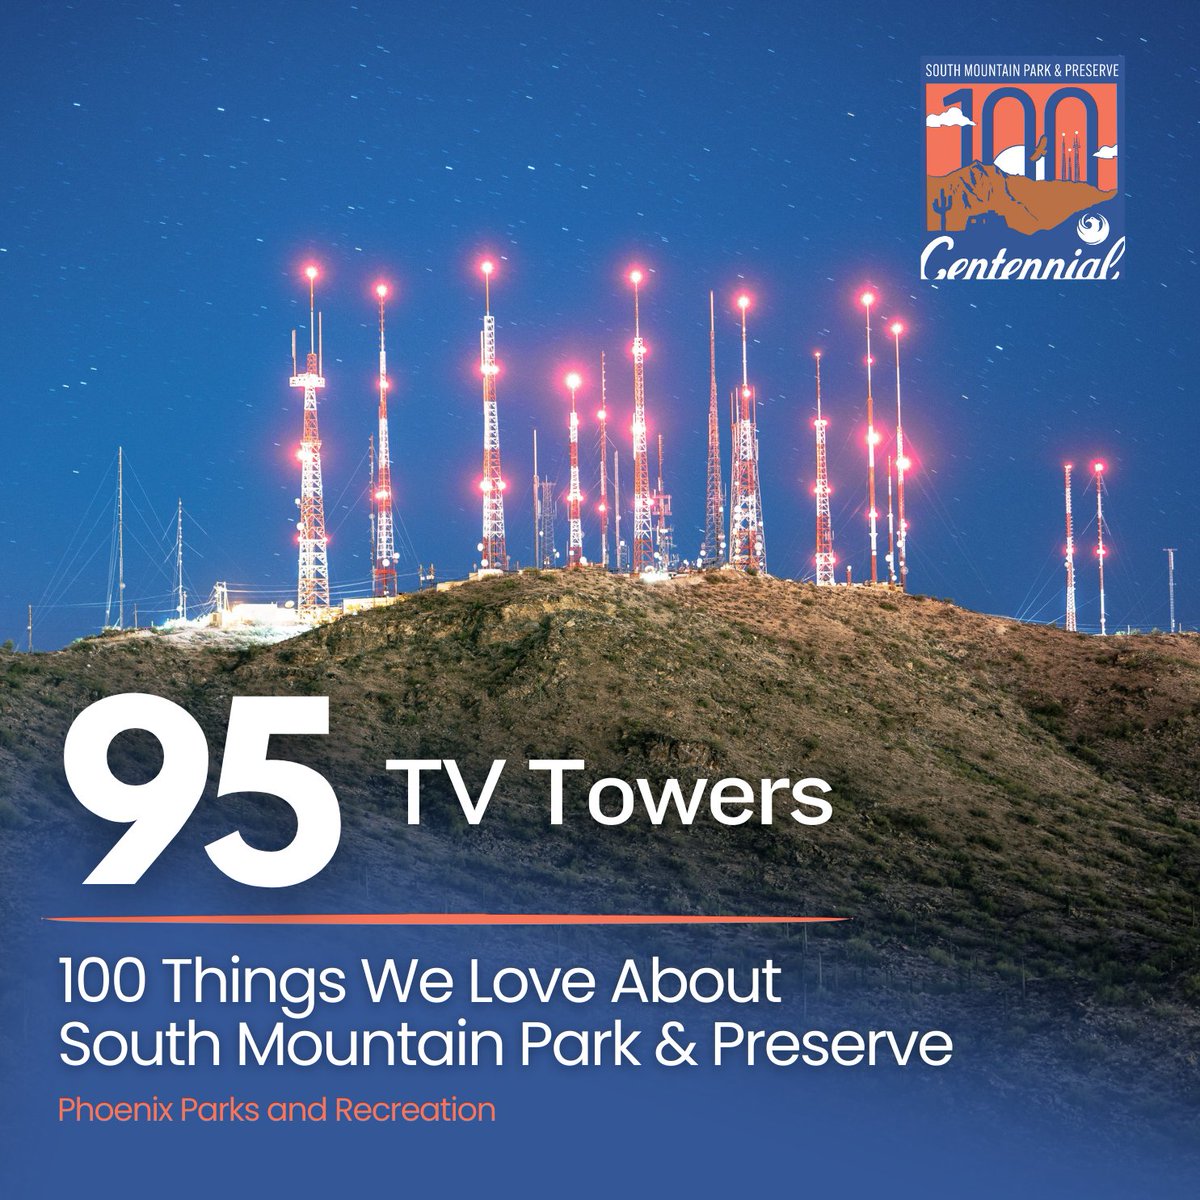 Ever wonder about those glowing TV Towers at South Mountain Park & Preserve? They stand tall above the Valley, providing the perfect spot for transmitting television signals for Phoenix from 2,000 feet up! 💡📺 🌵 #southmountain100 #phxparks #phoenixparksandrecreation